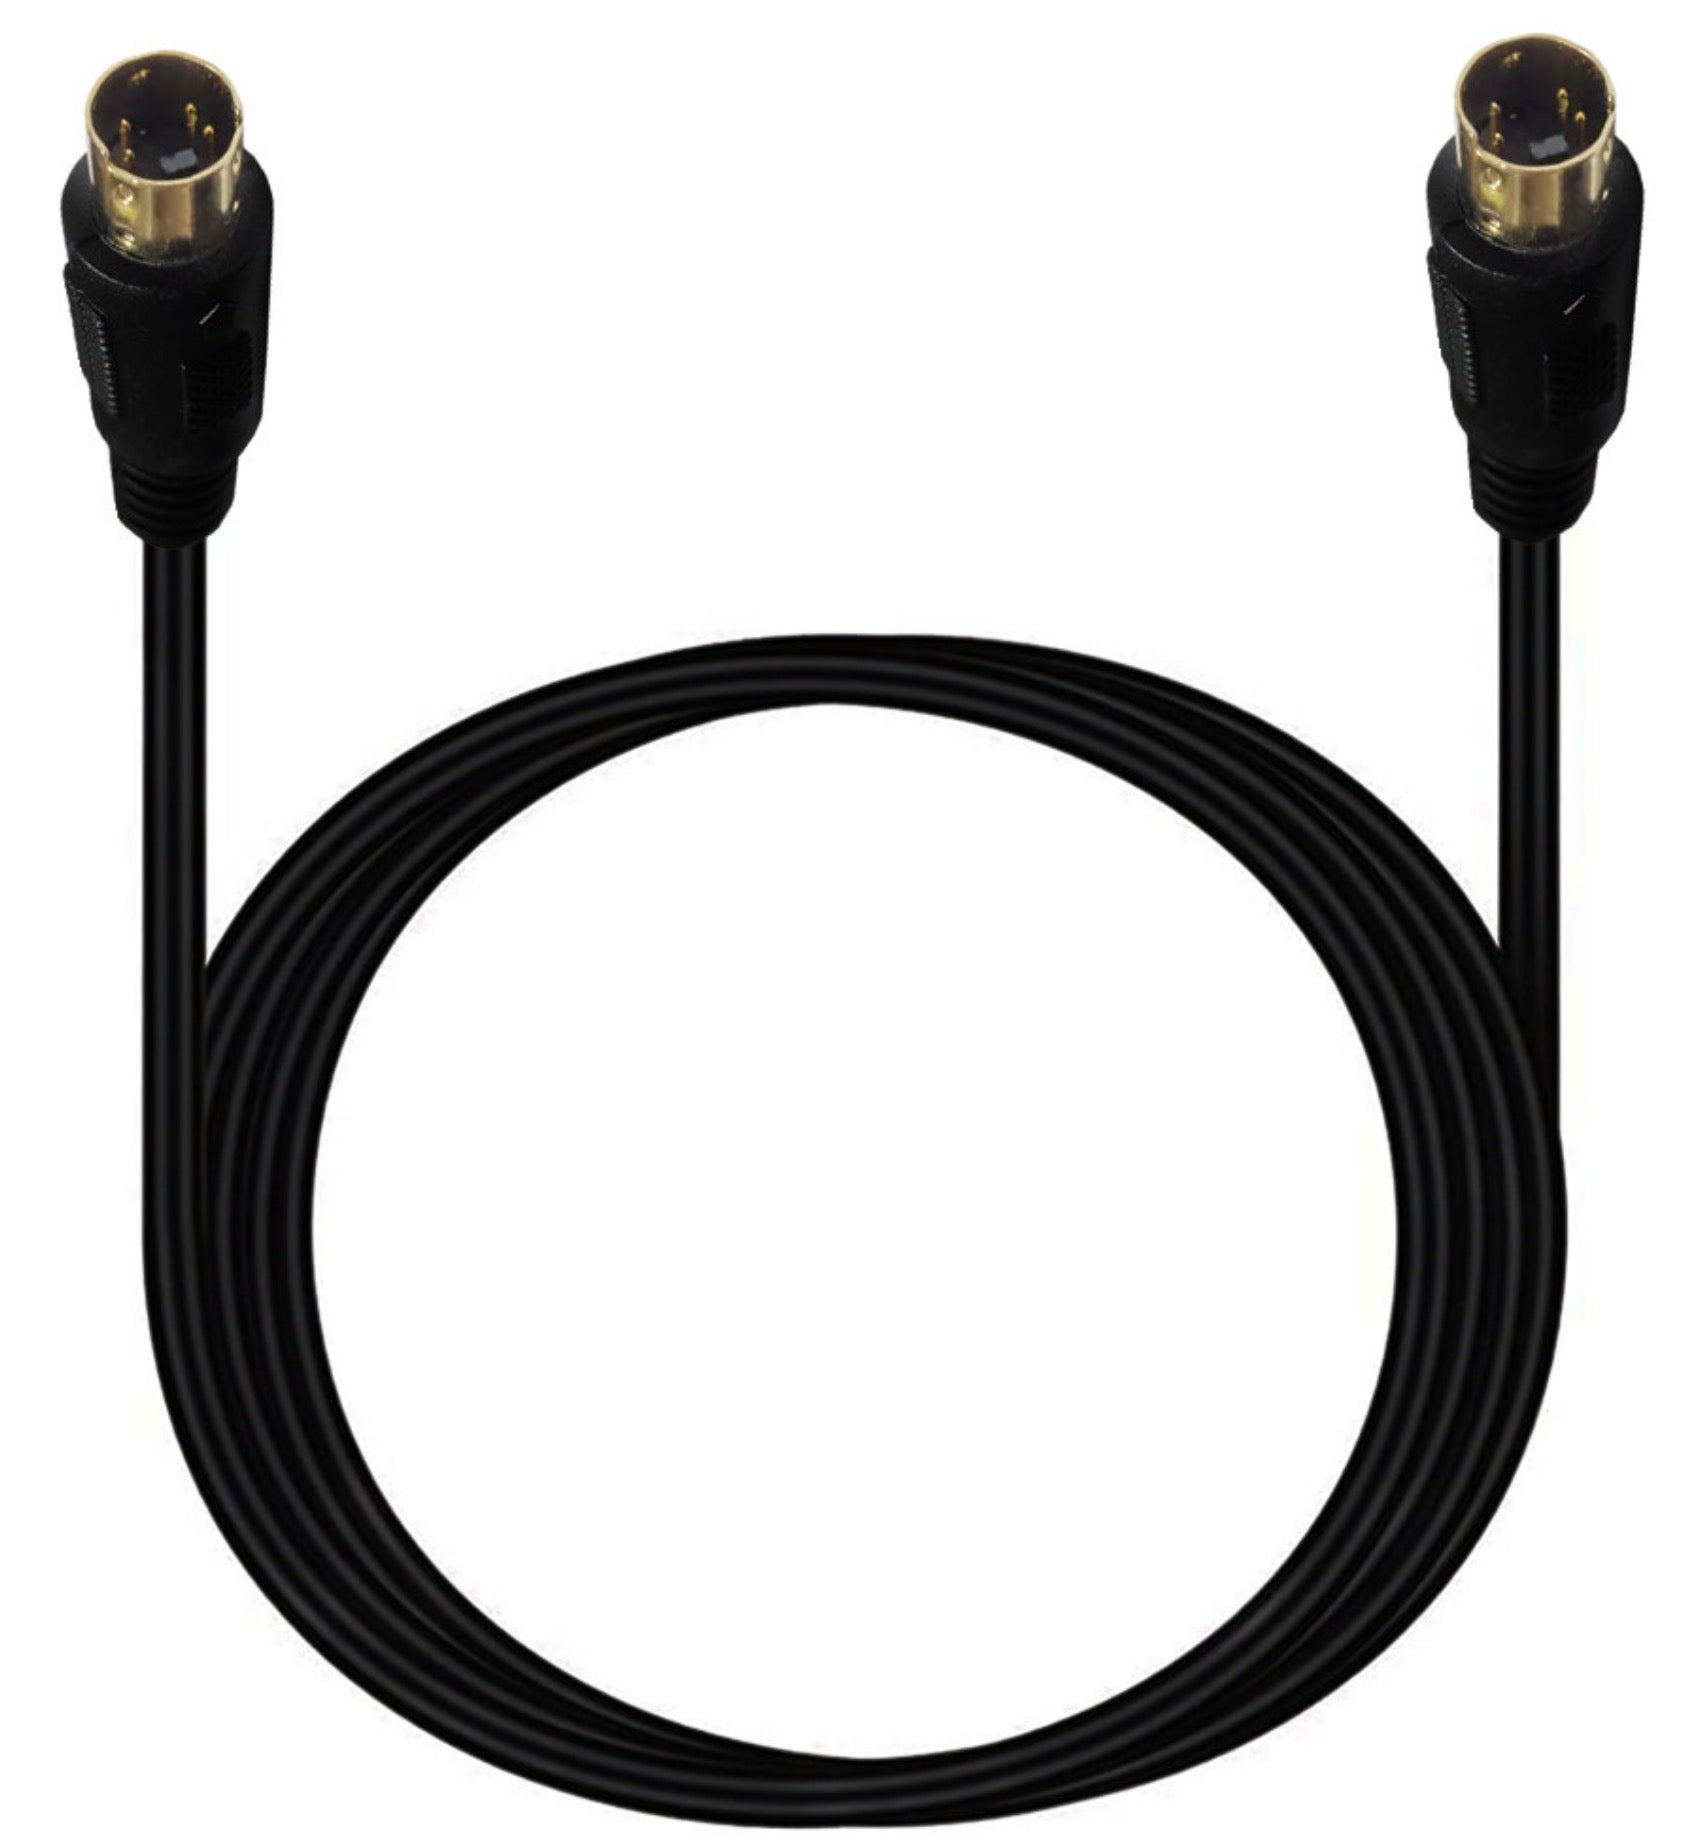 S-Video 4 Pin Male to Male Video Cable